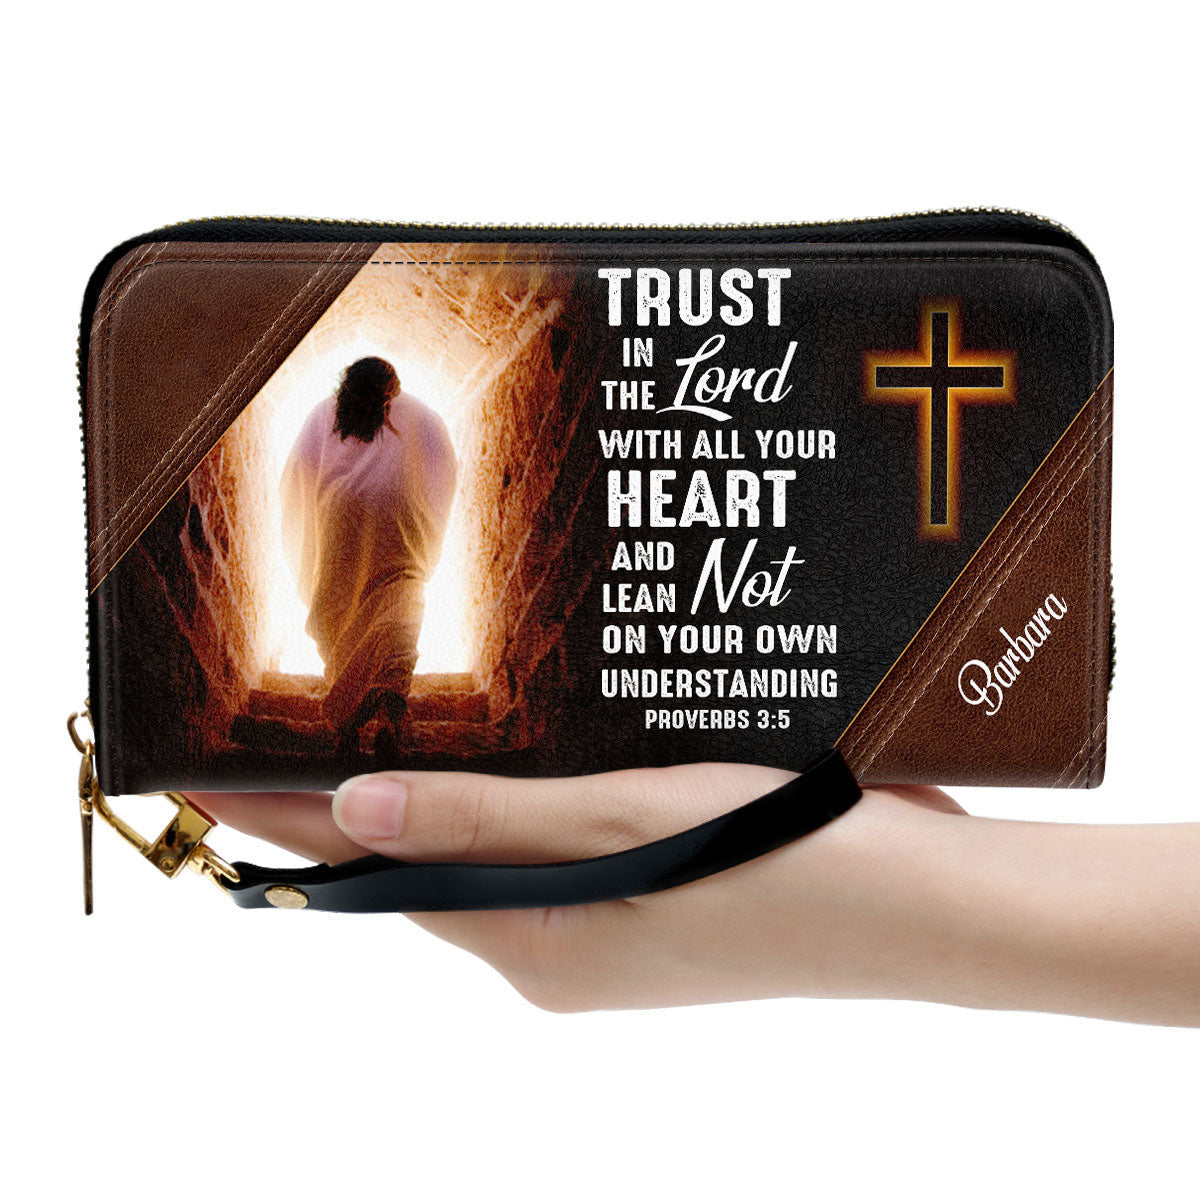 Beautiful Personalized Clutch Purse - Trust In The Lord With All Your Heart Clutch Purse - Women Clutch Purse